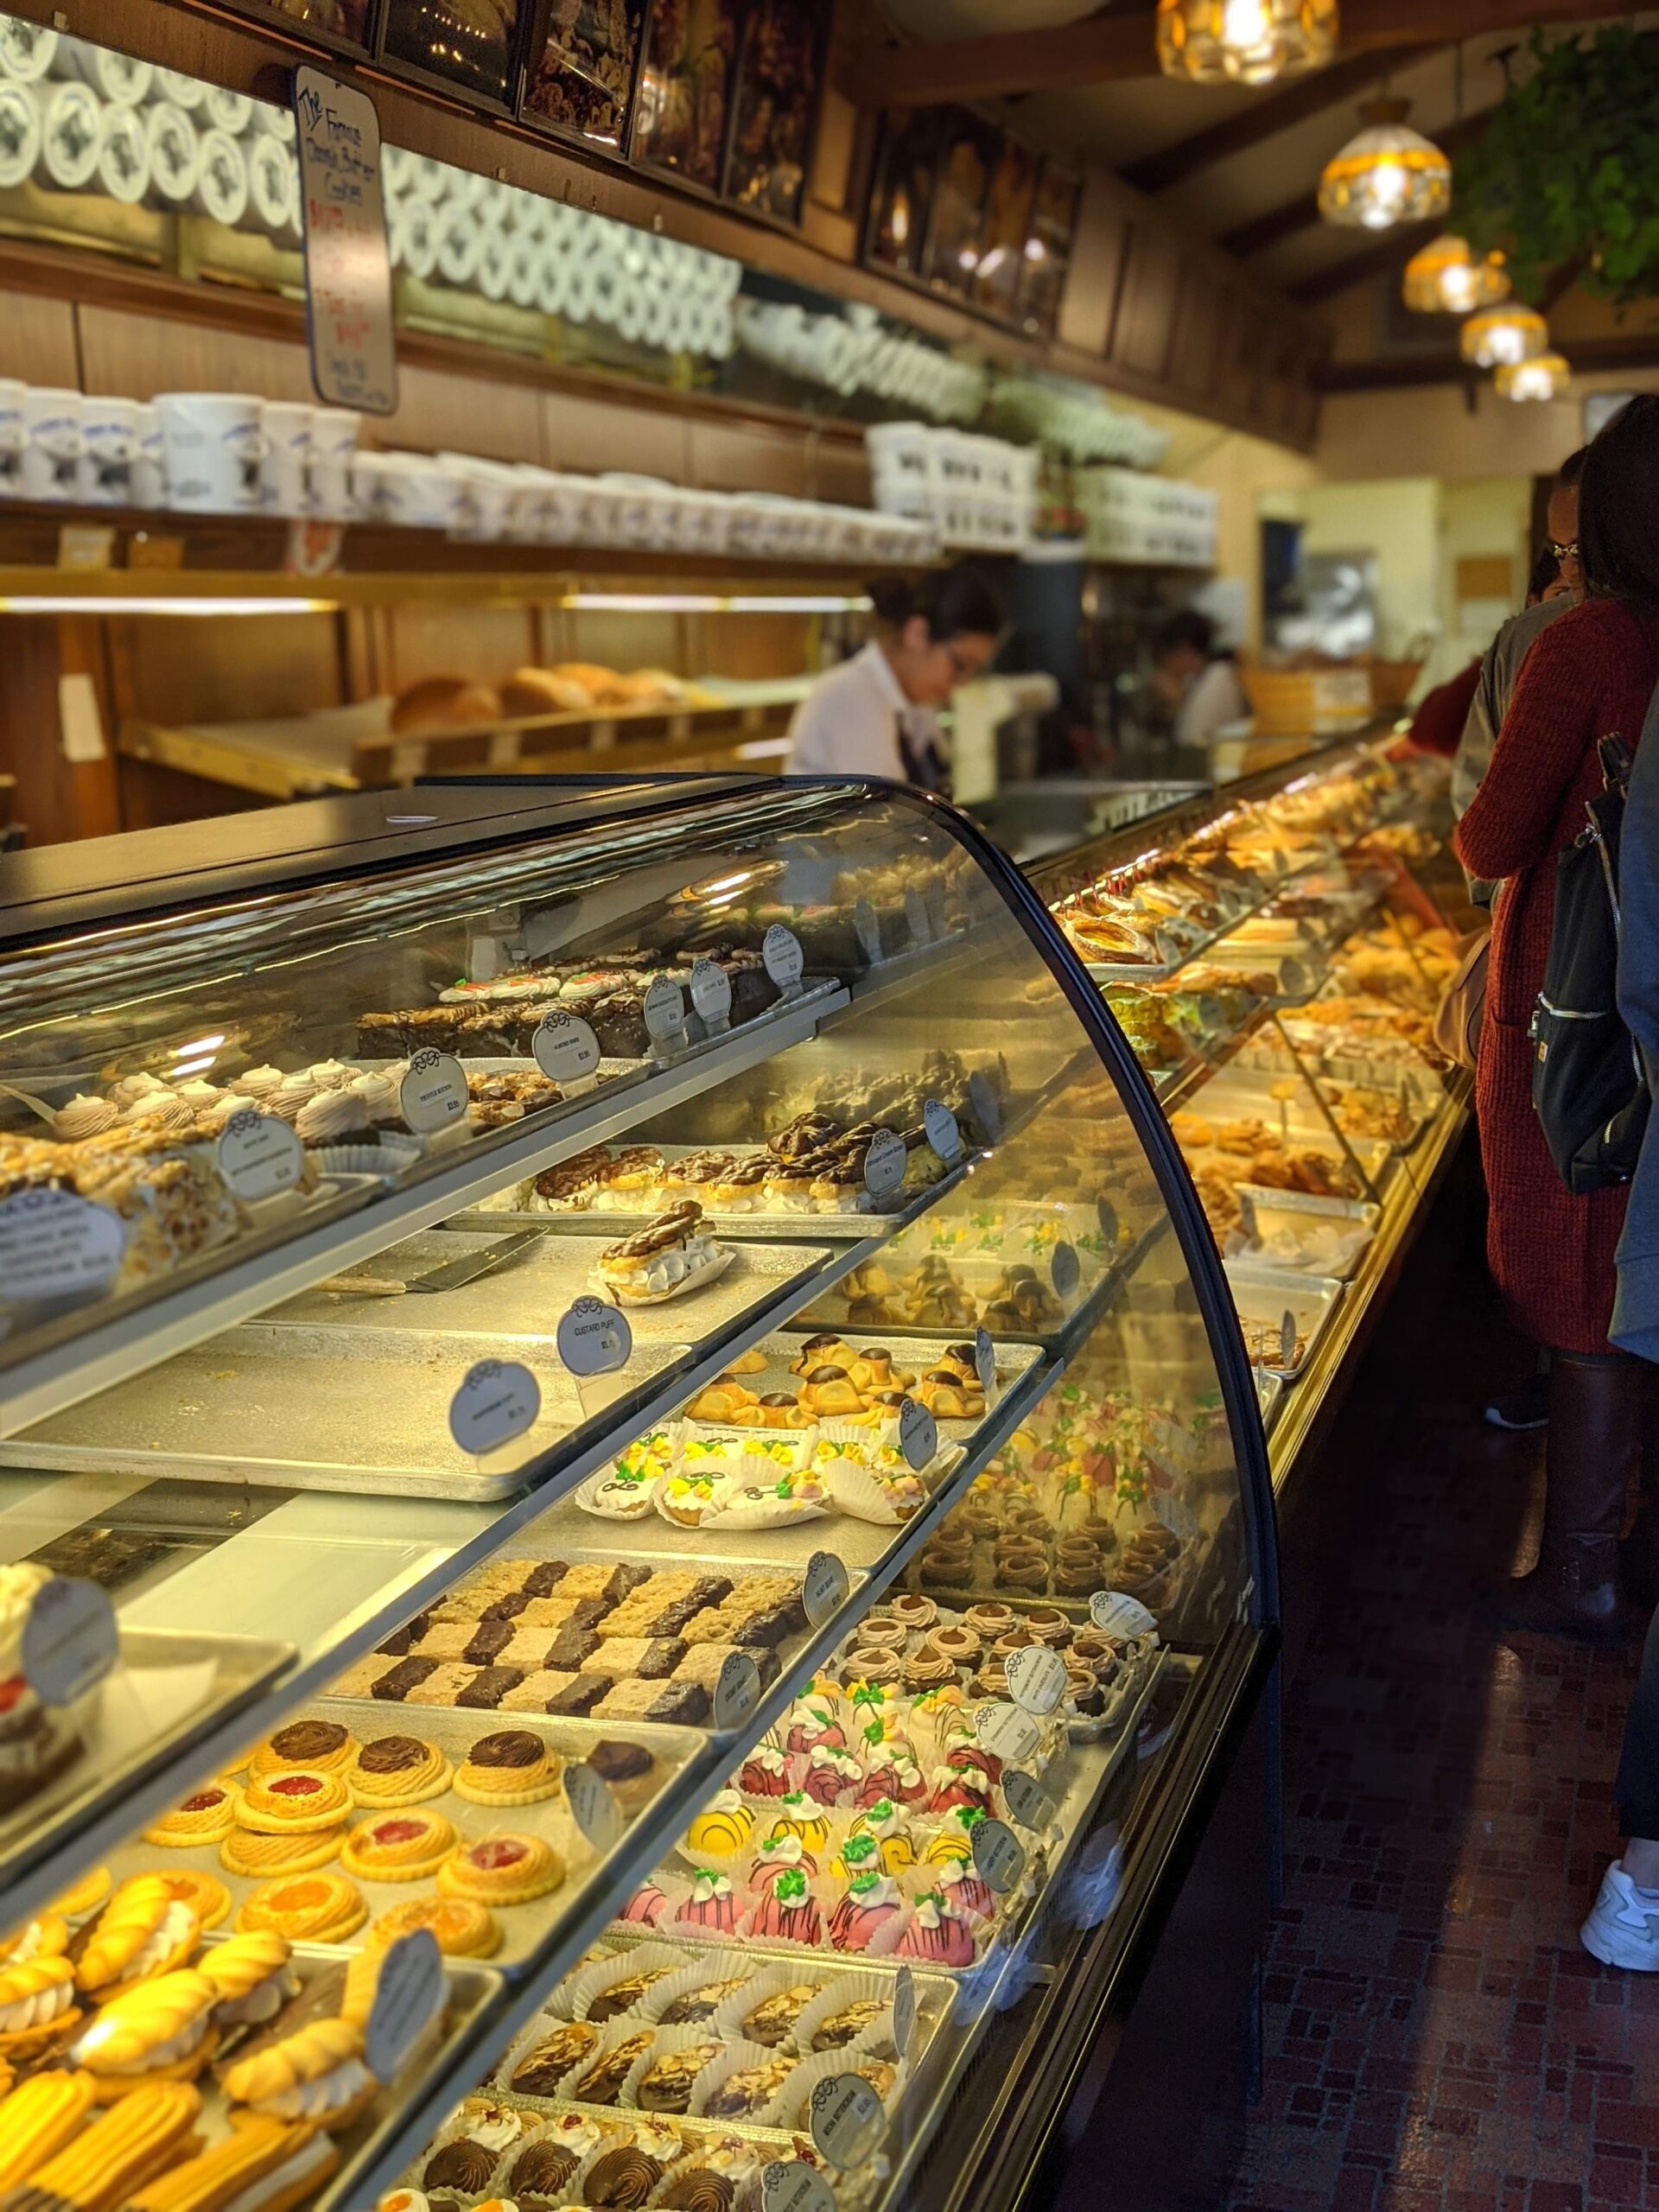 Pastry counter at an iconic bakery in Solvang.